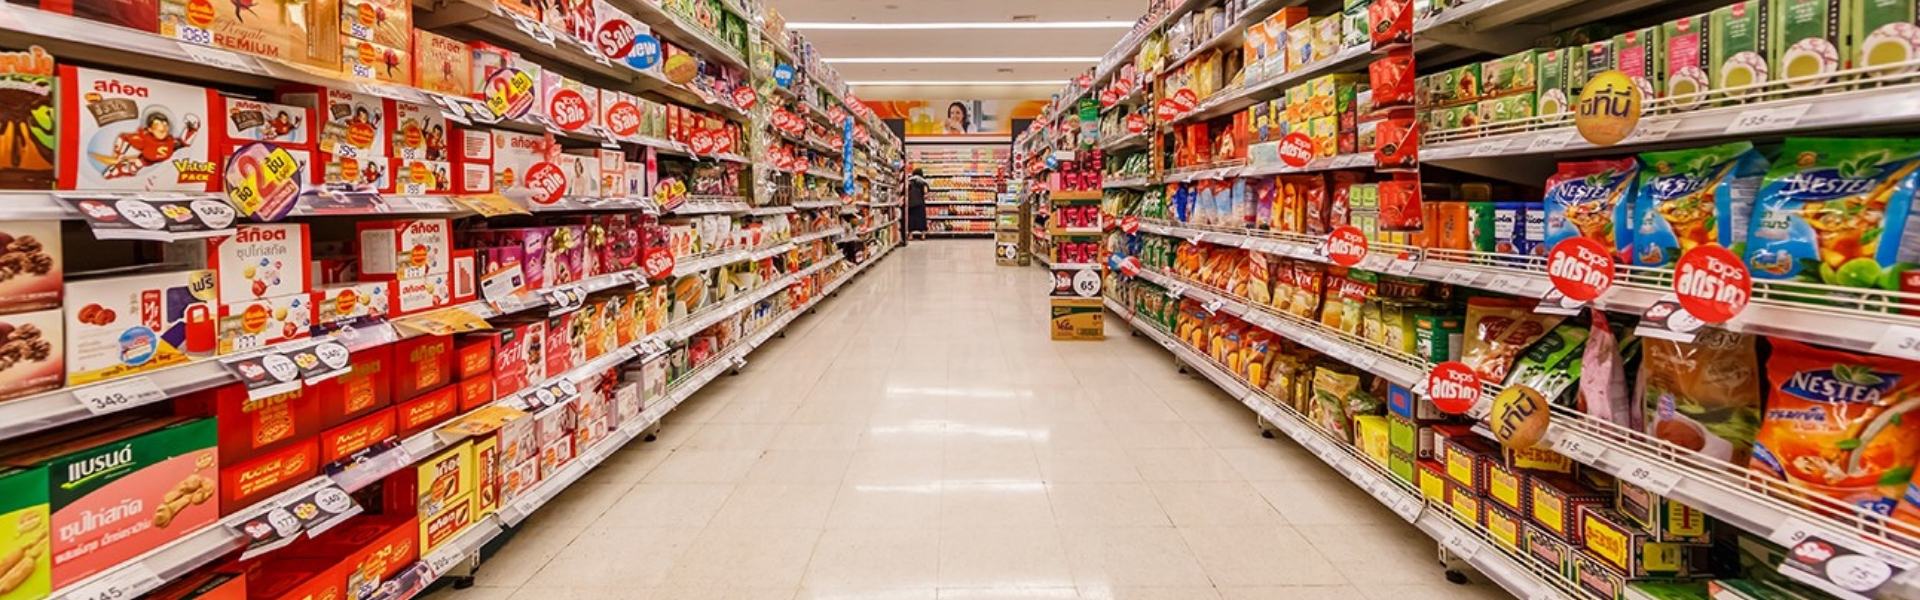 Top 3 trend-points and predictions for CPG companies in 2019